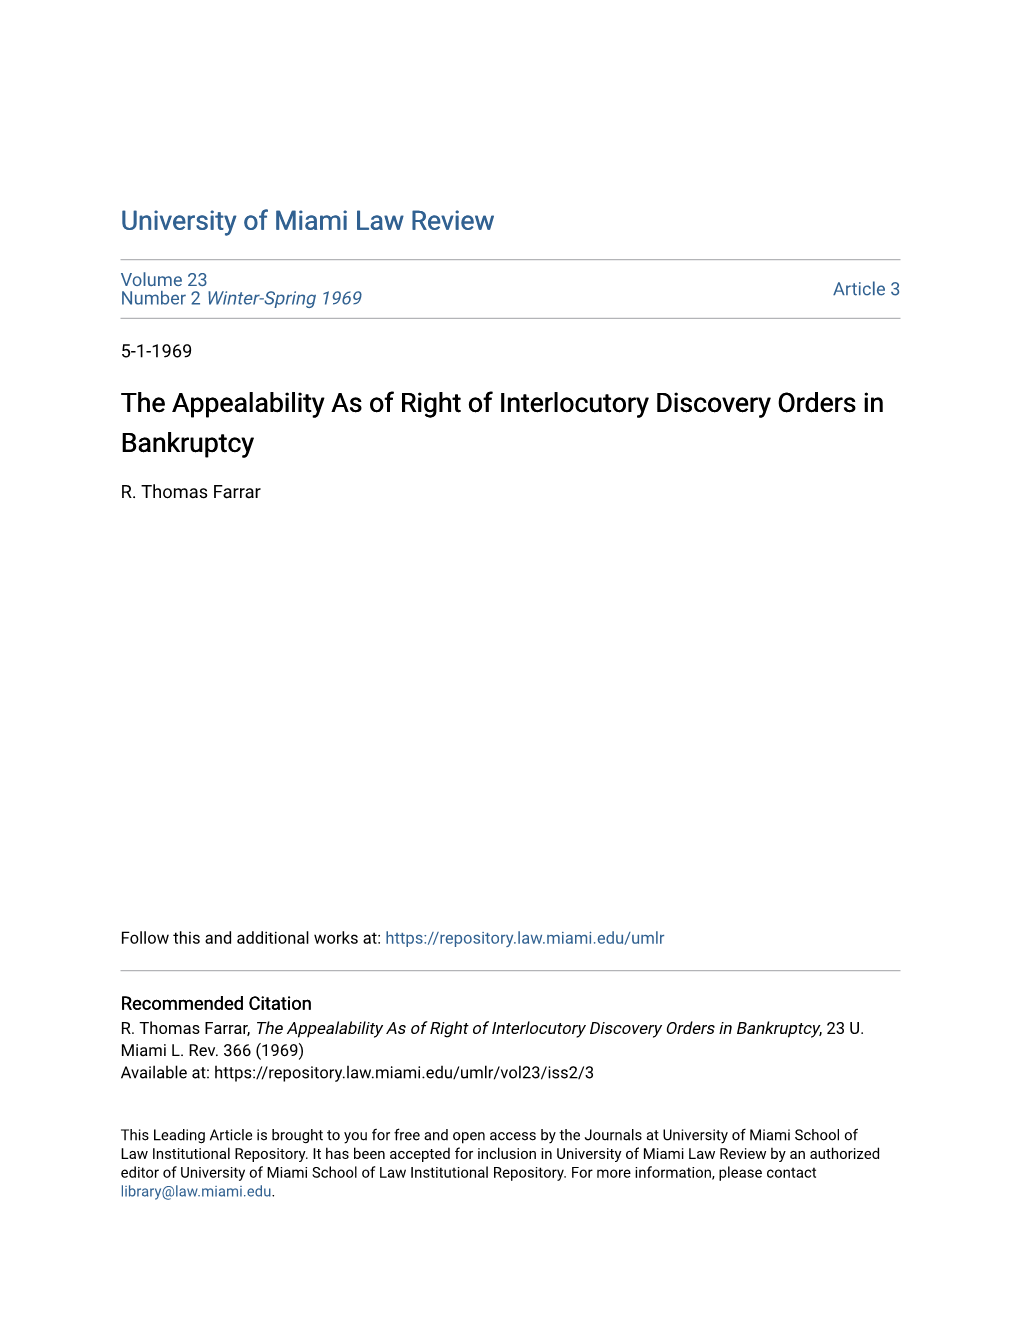 The Appealability As of Right of Interlocutory Discovery Orders in Bankruptcy